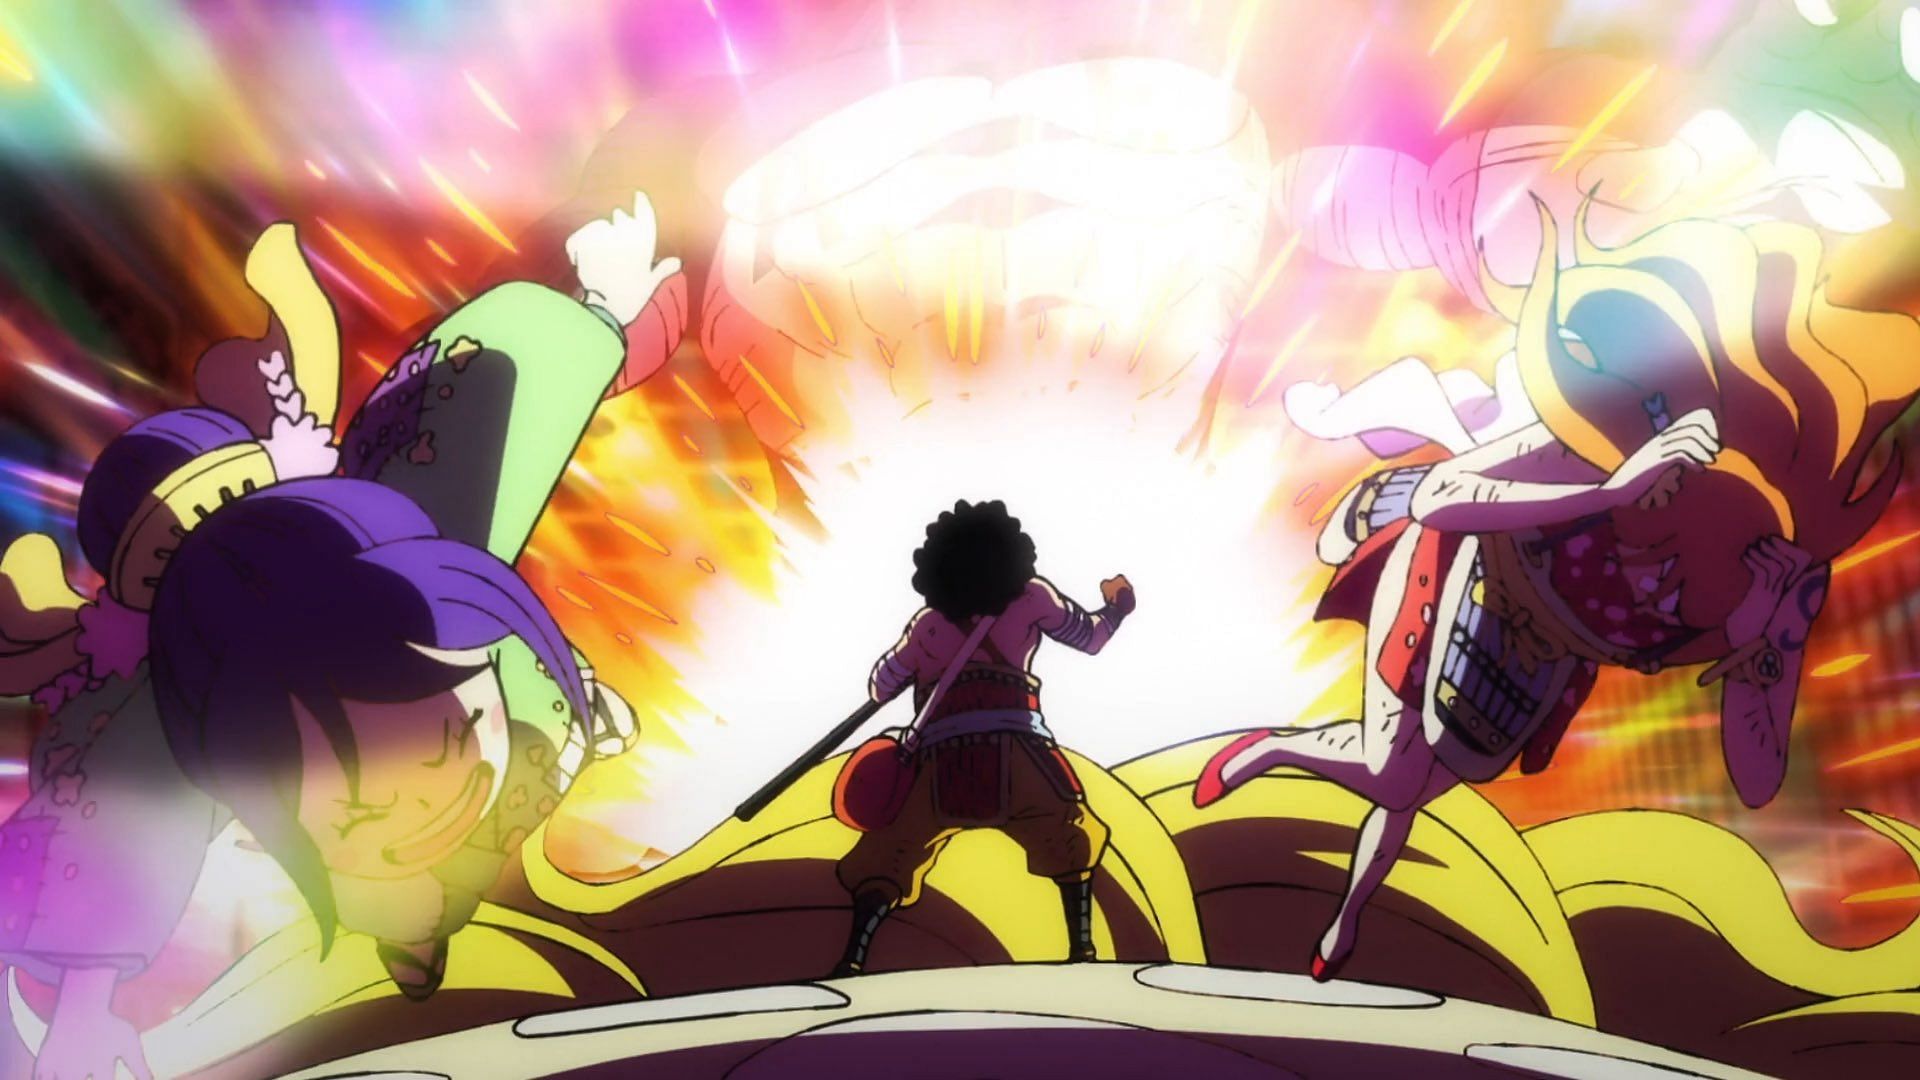 Usopp attacking Page One in One Piece Episode 1031 (Image via Toei Animation)